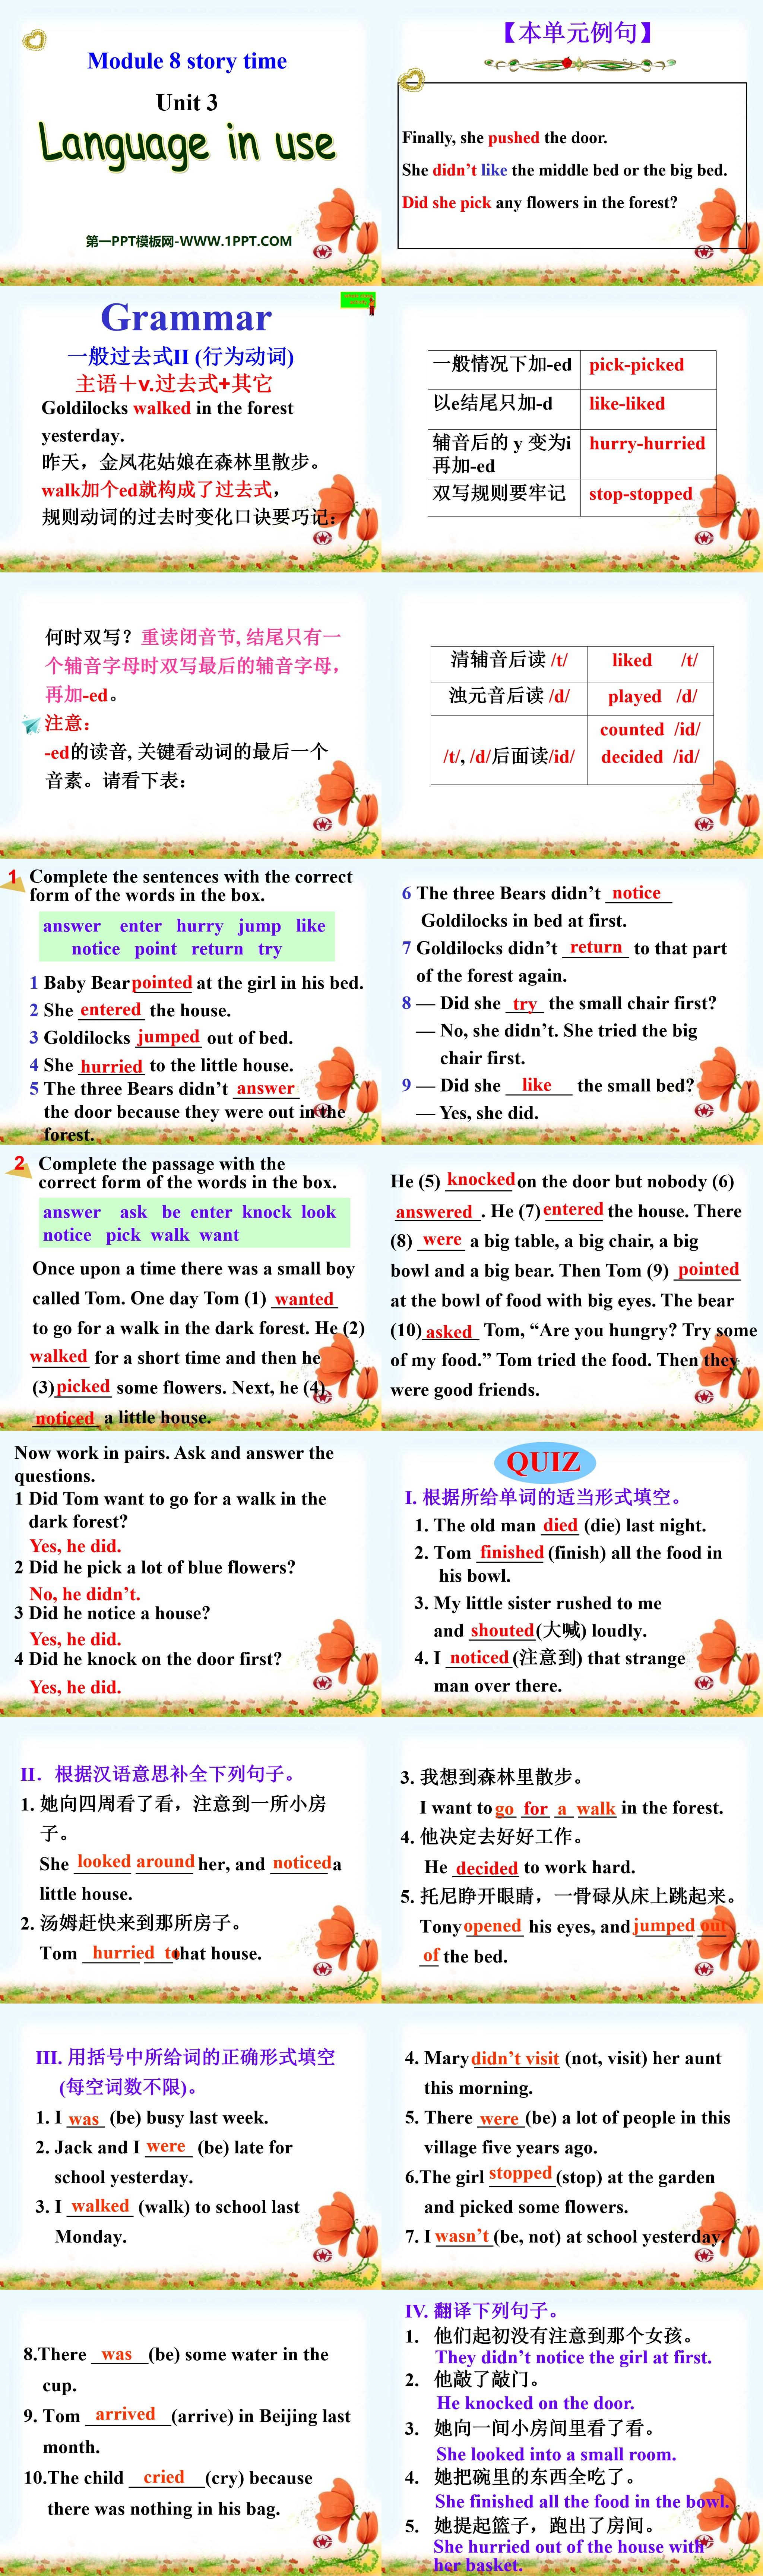 《Language in use》Story time PPT课件
（2）